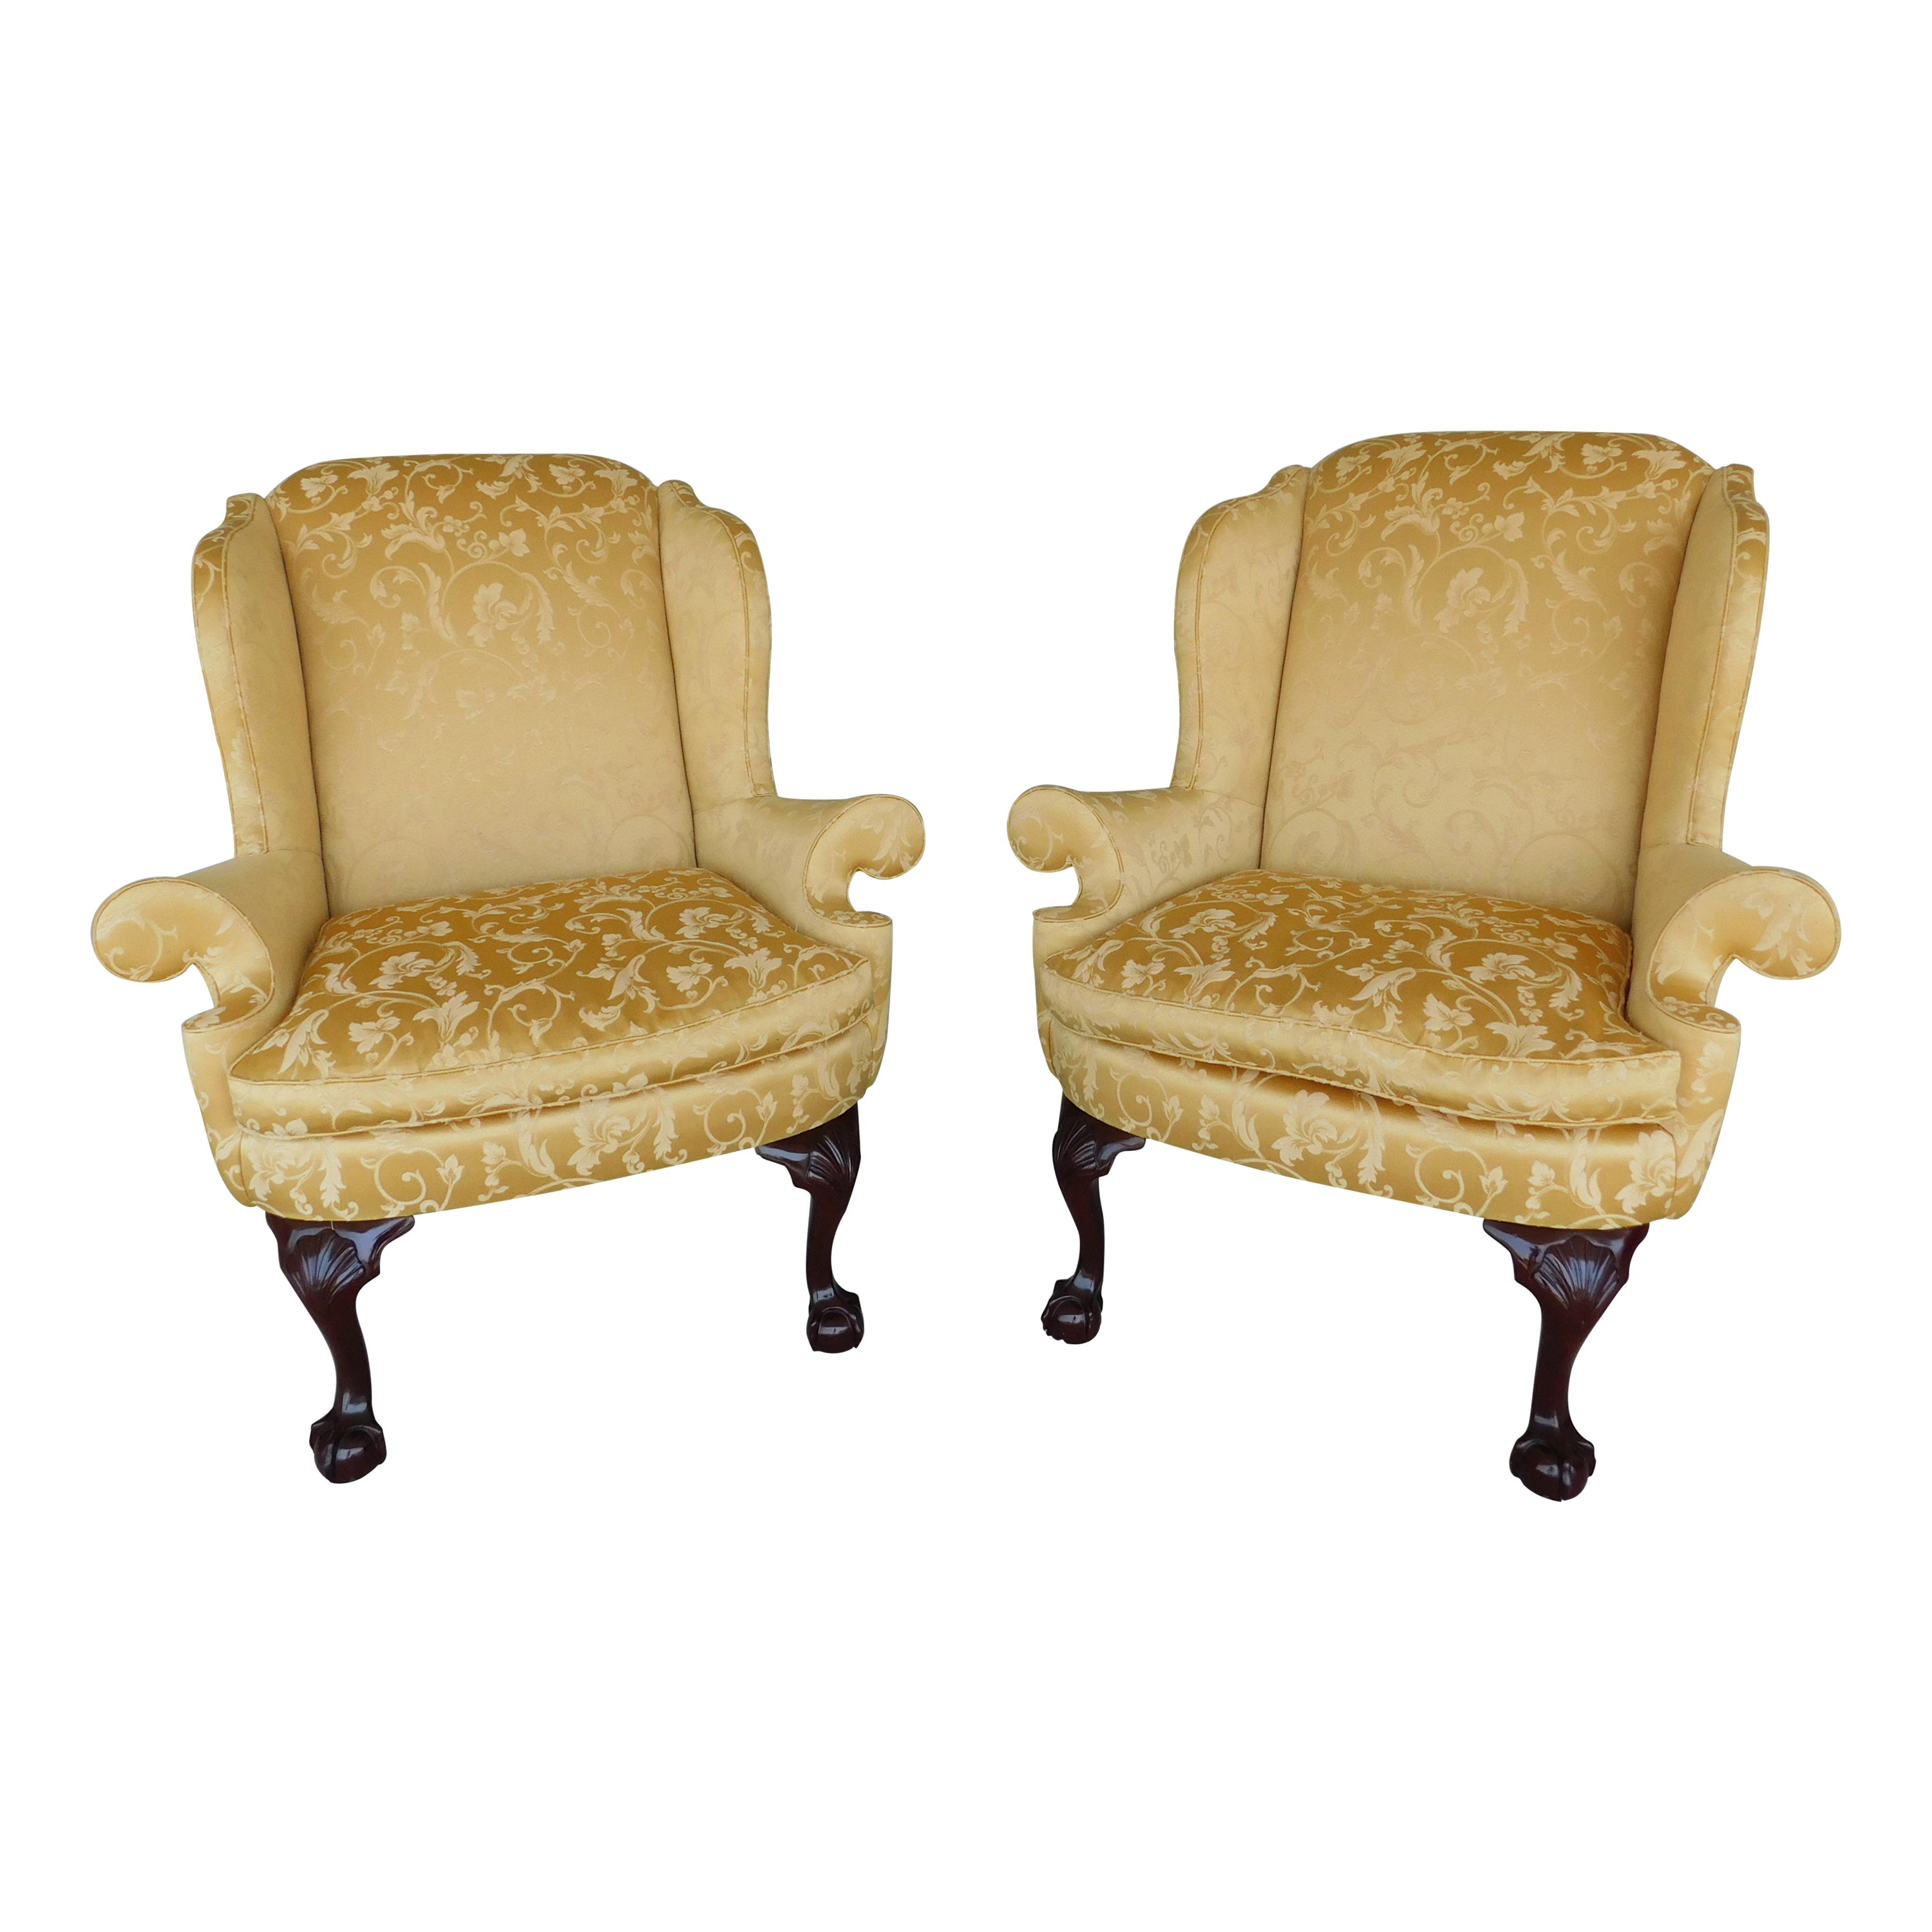 Kindel Winterthur Collection Chippendale Style Wing Back Chairs - a Pair